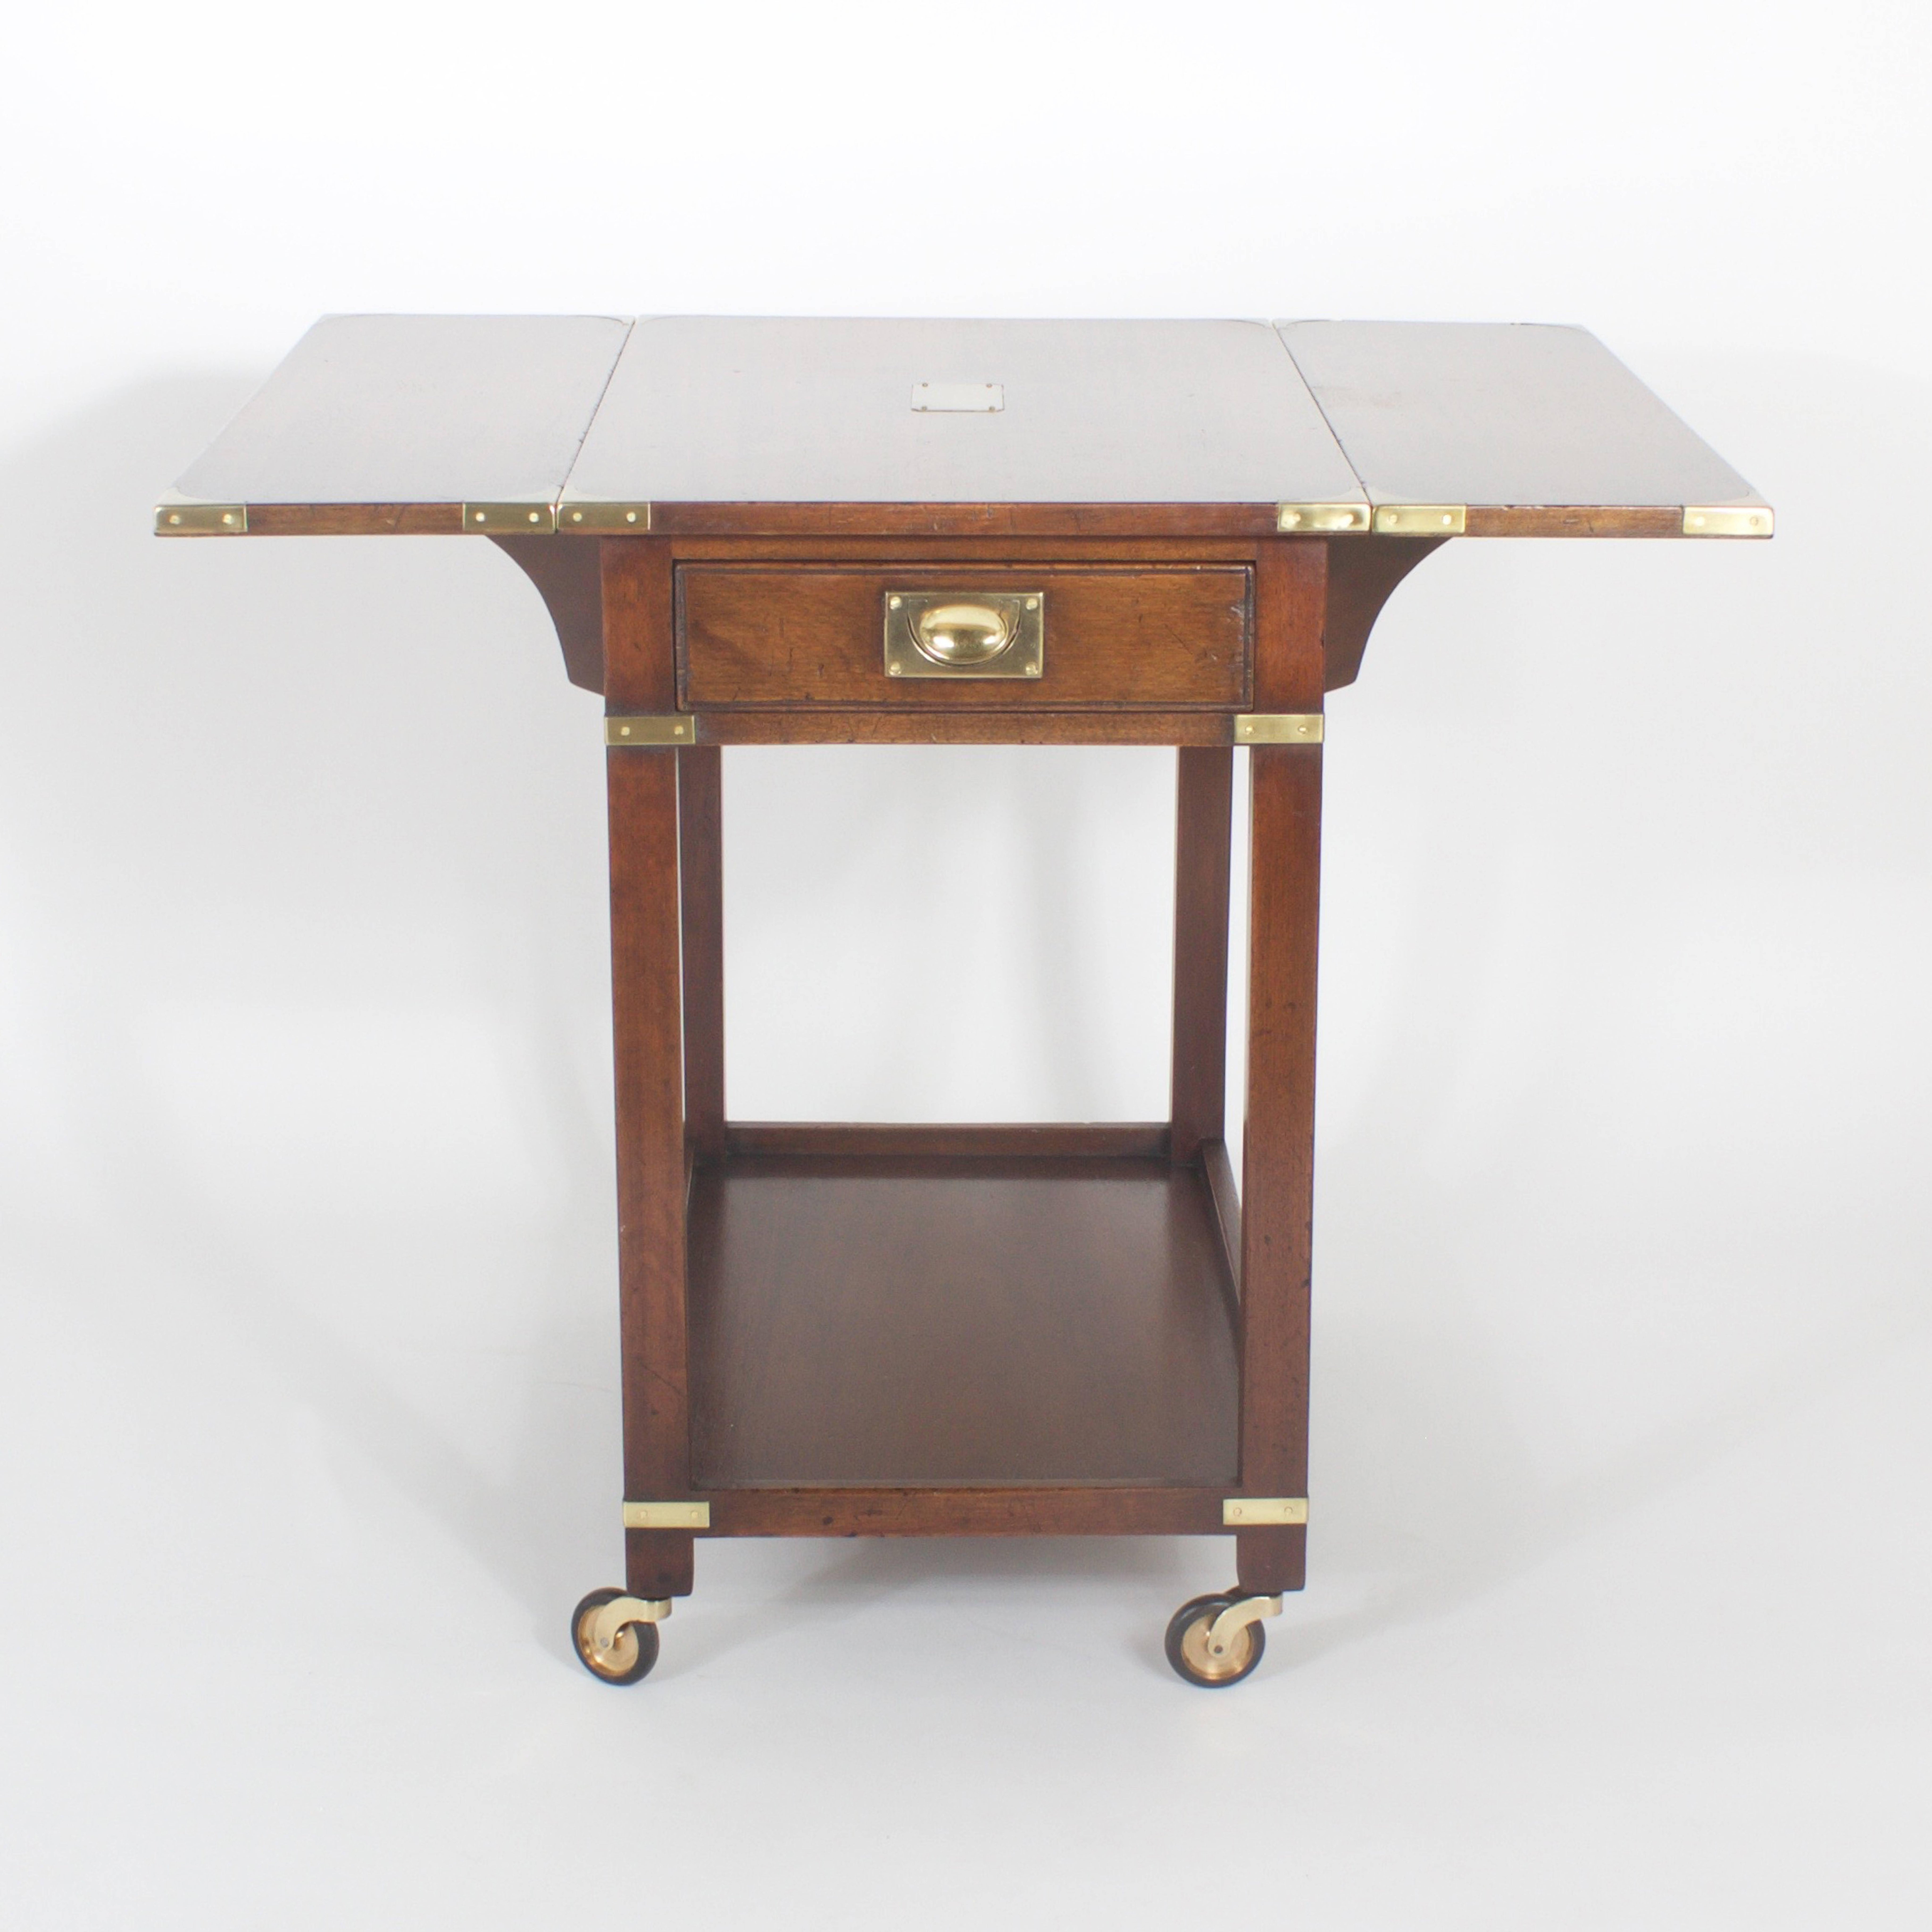 Campaign style mahogany drinks trolley or service cart with a utensil drawer and drop leaves. Featuring fine quality Campaign style brass hardware, lower level storage tray and blank brass plaque on top awaiting your inscription. (See below for